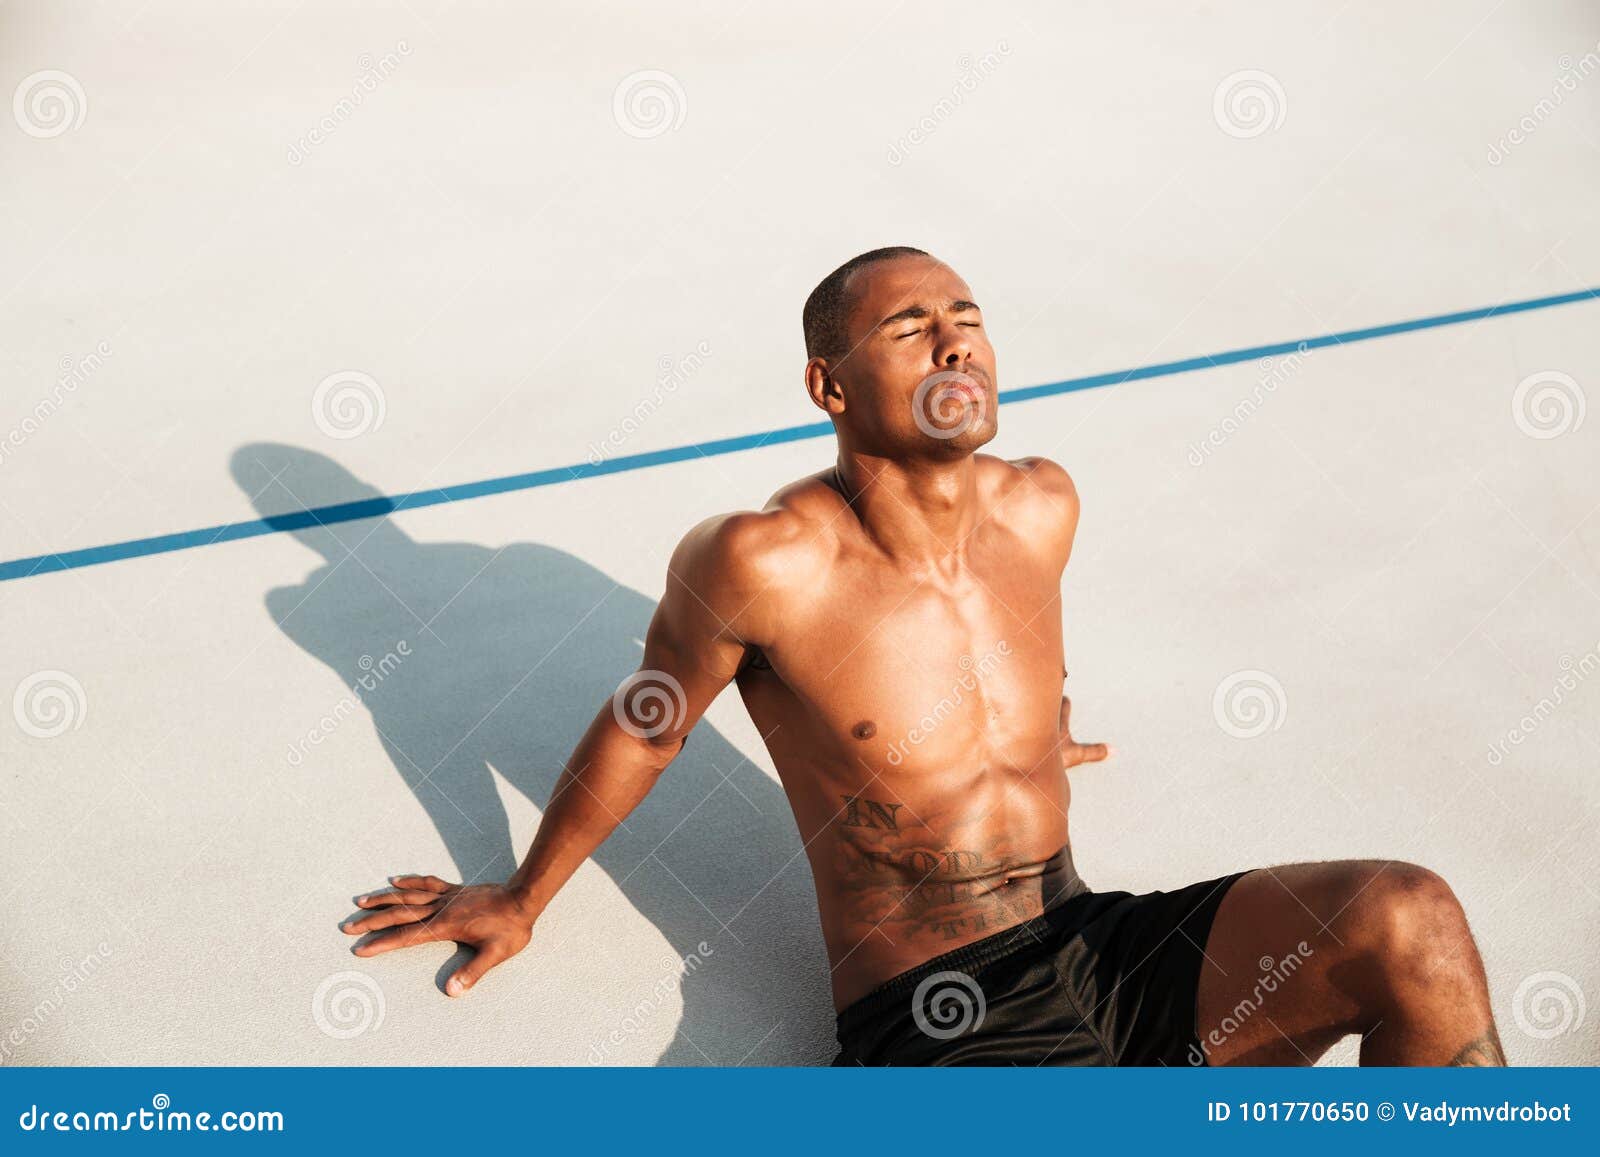 Half Naked Body Of Muscular Athletic Sportsman Stock Photo 